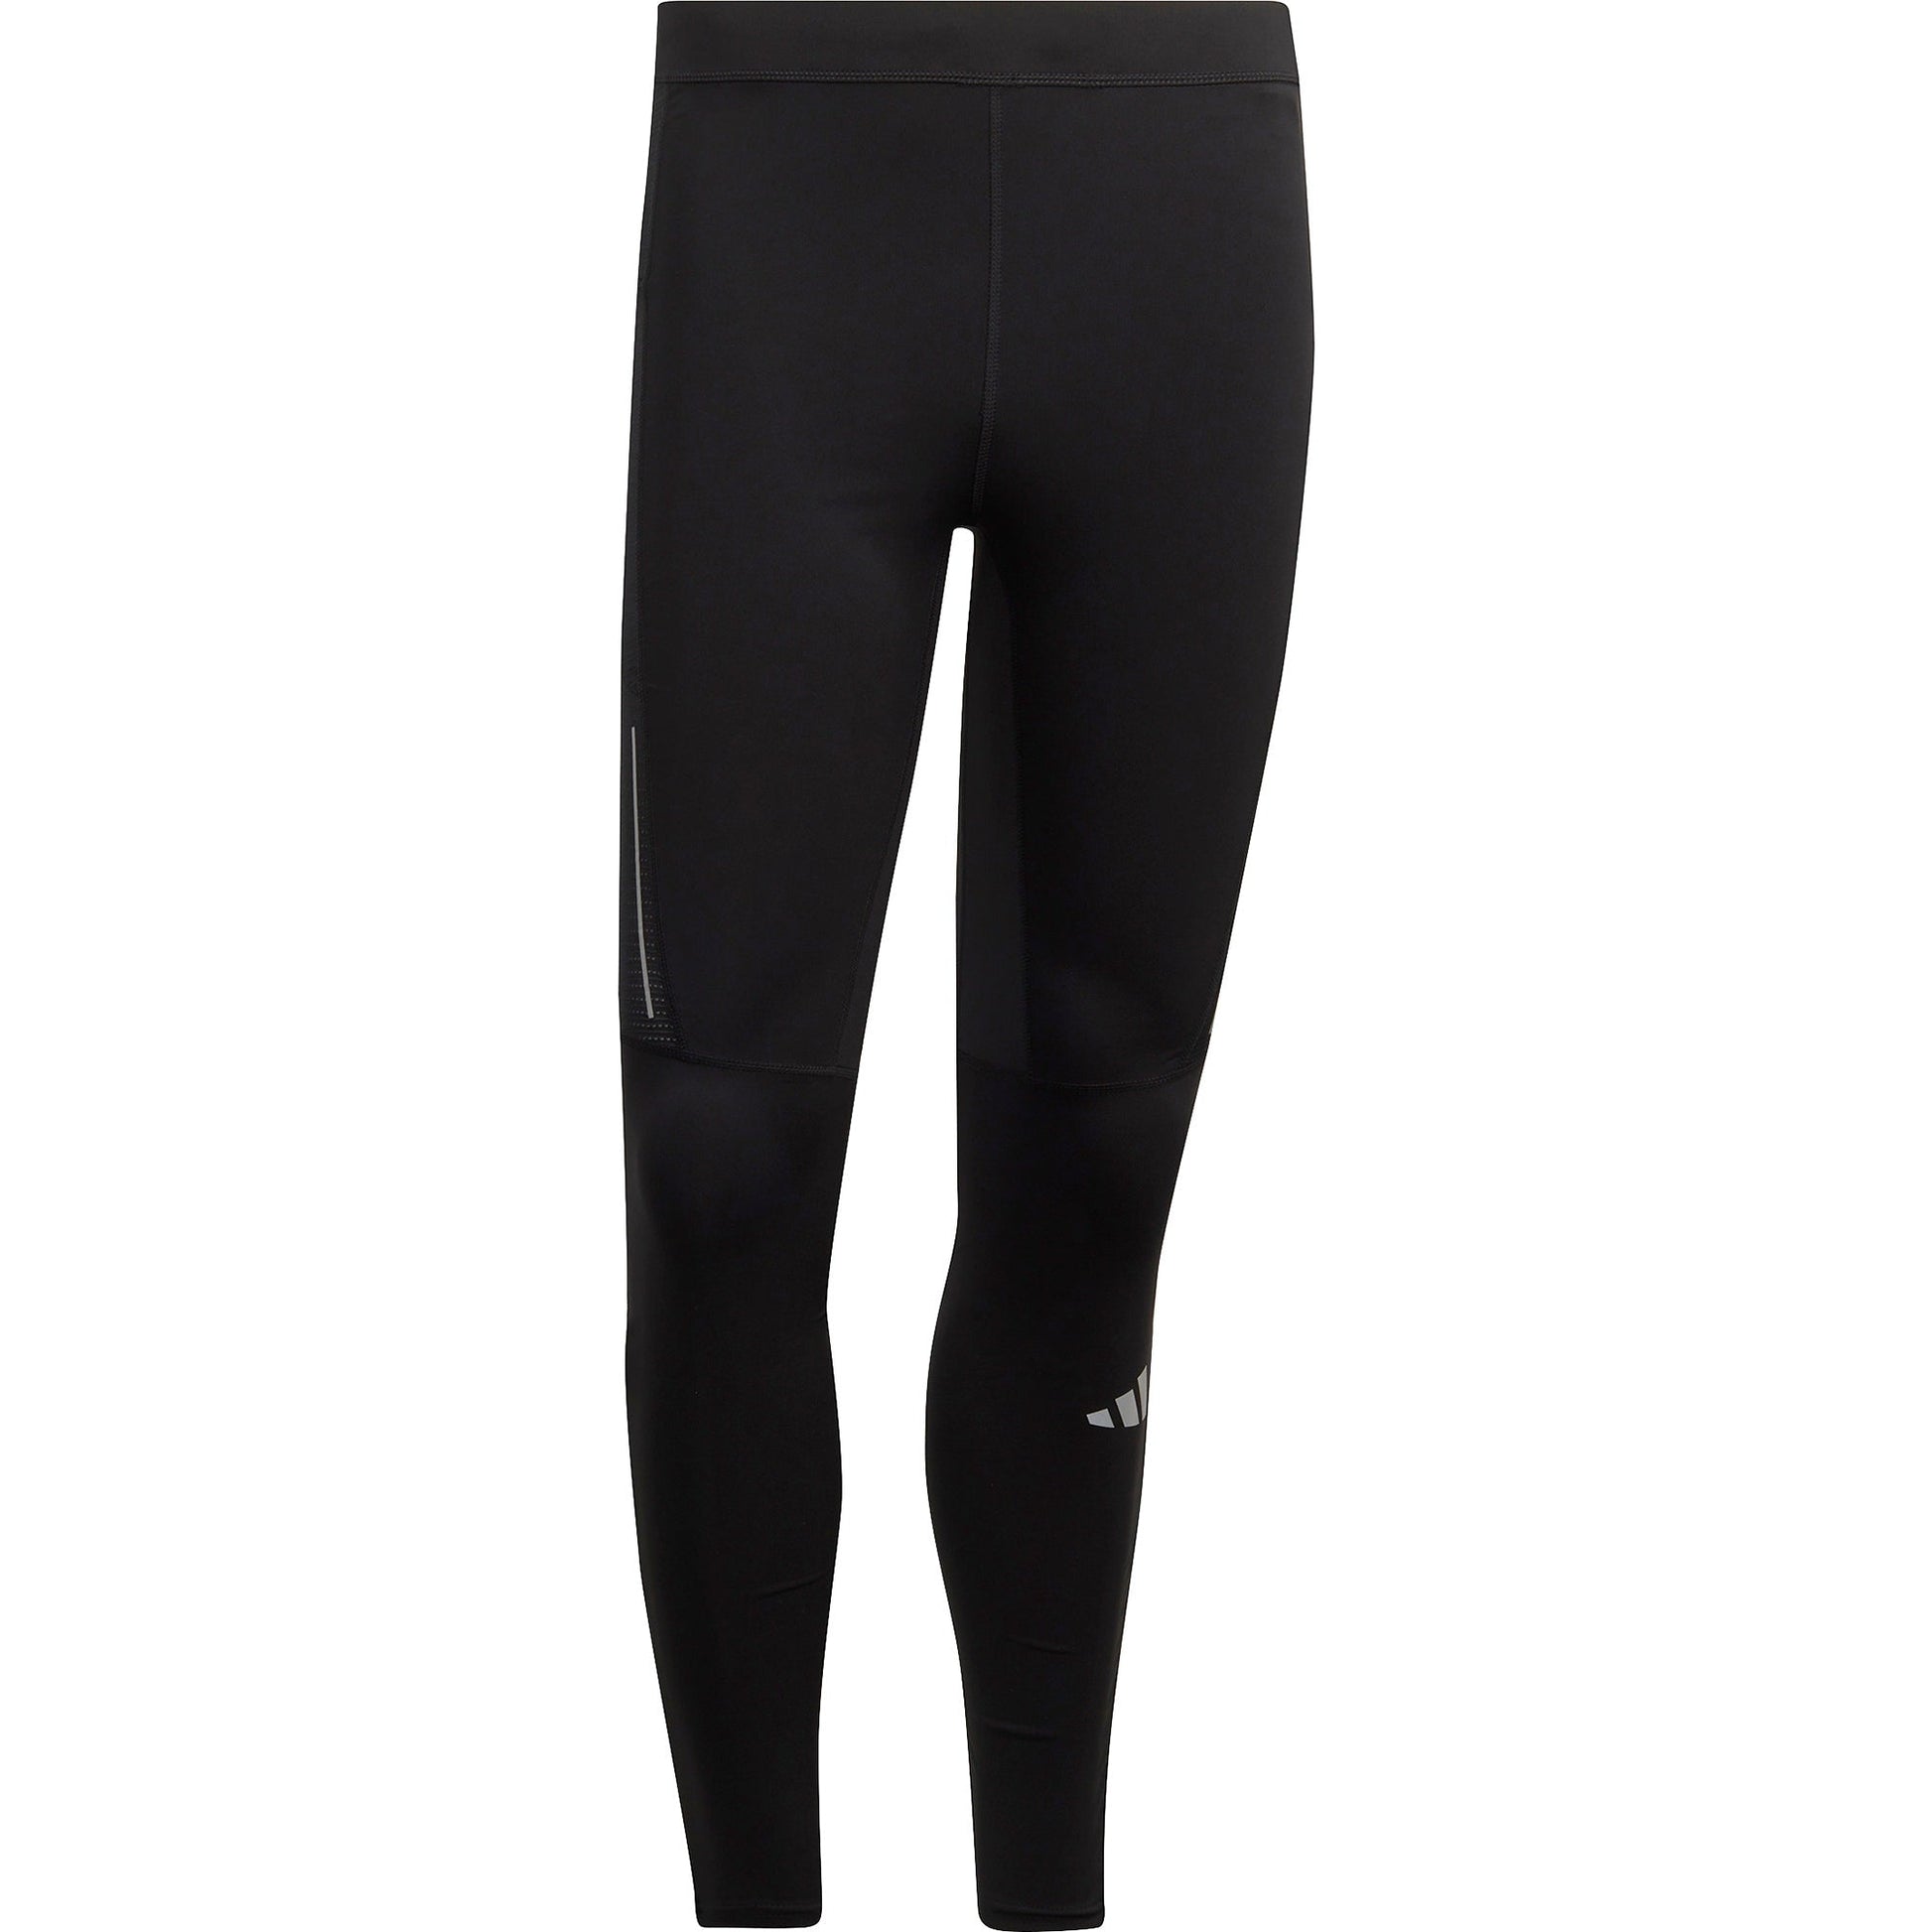 Adidas Own The Run Long Tights Hm8444 Front - Front View